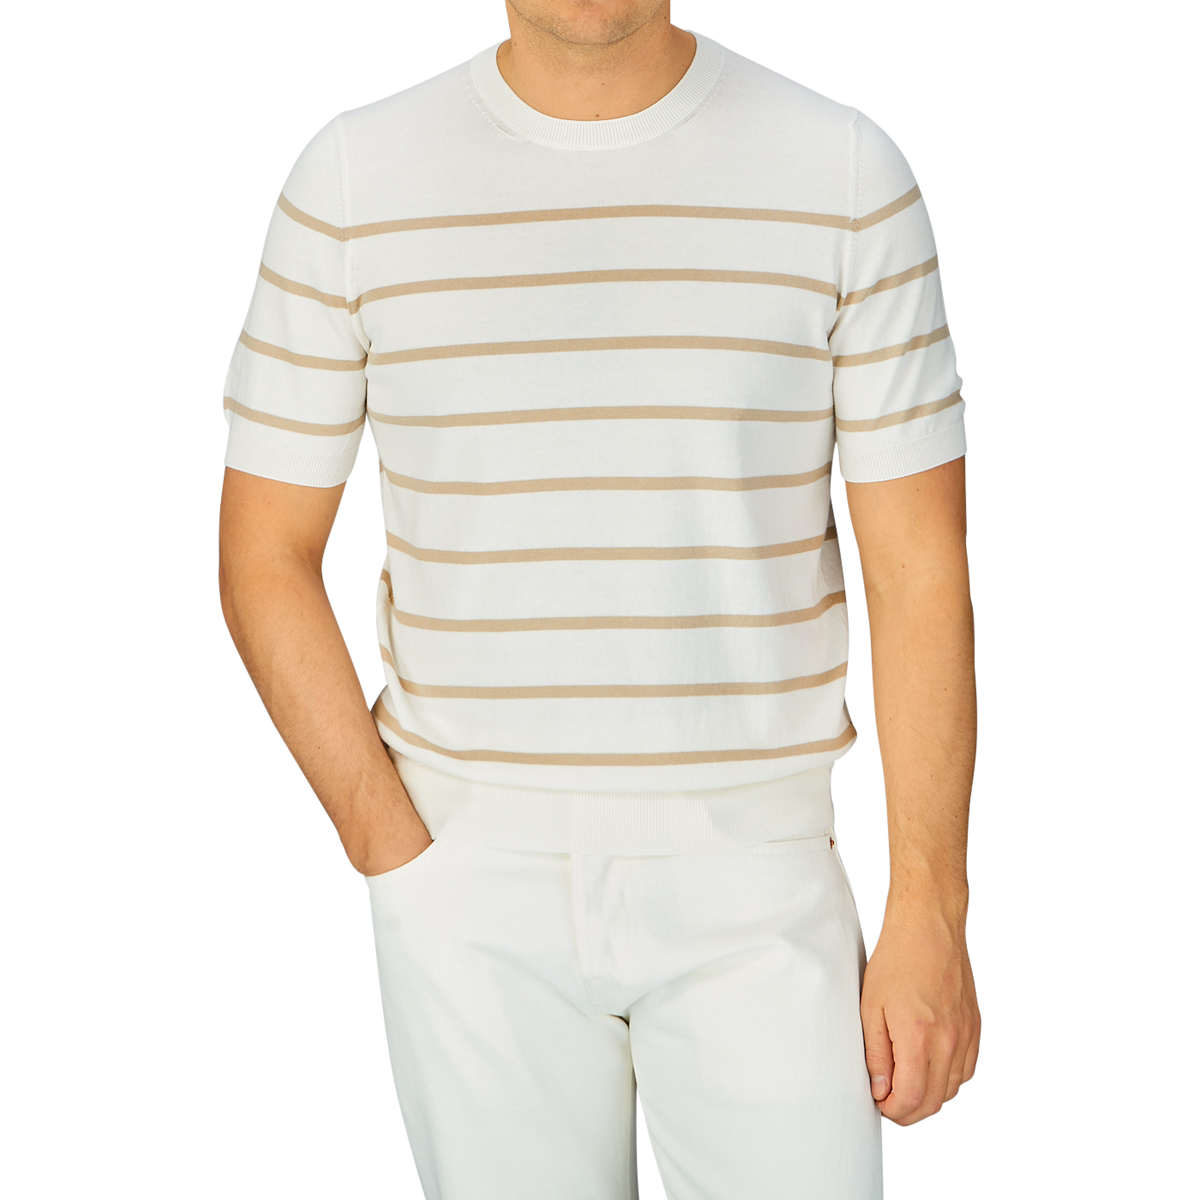 Man wearing a Cream Beige Striped Organic Cotton T-Shirt from Gran Sasso with white pants.